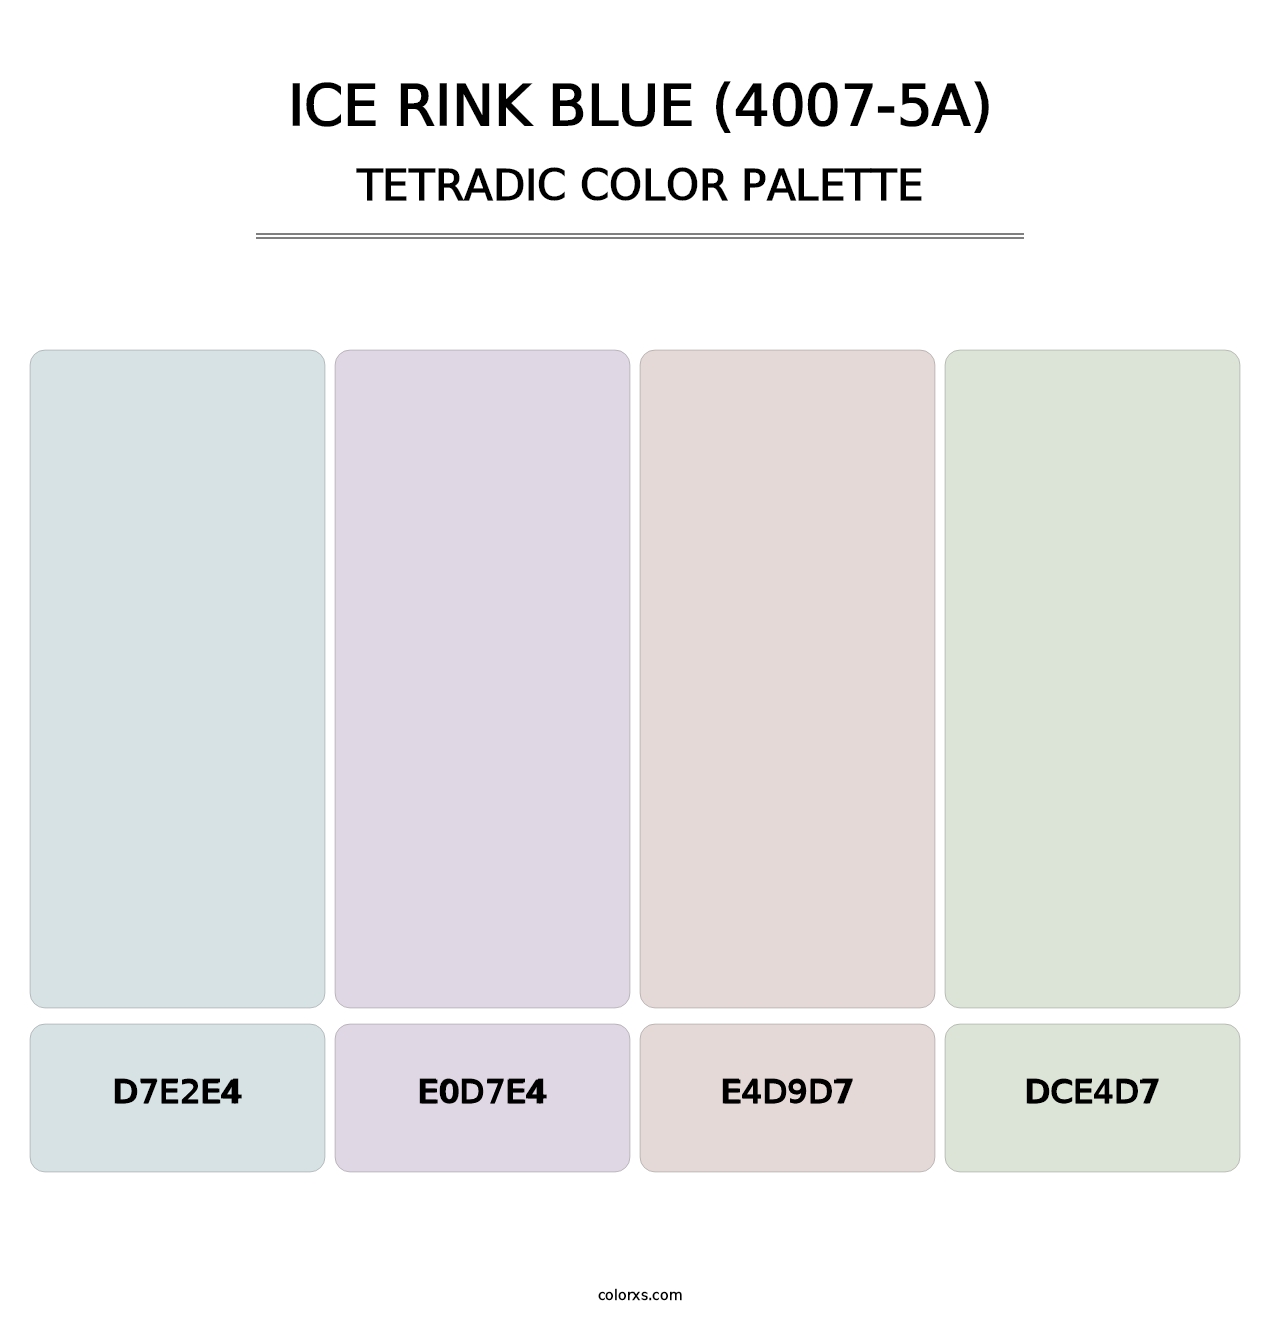 Ice Rink Blue (4007-5A) - Tetradic Color Palette